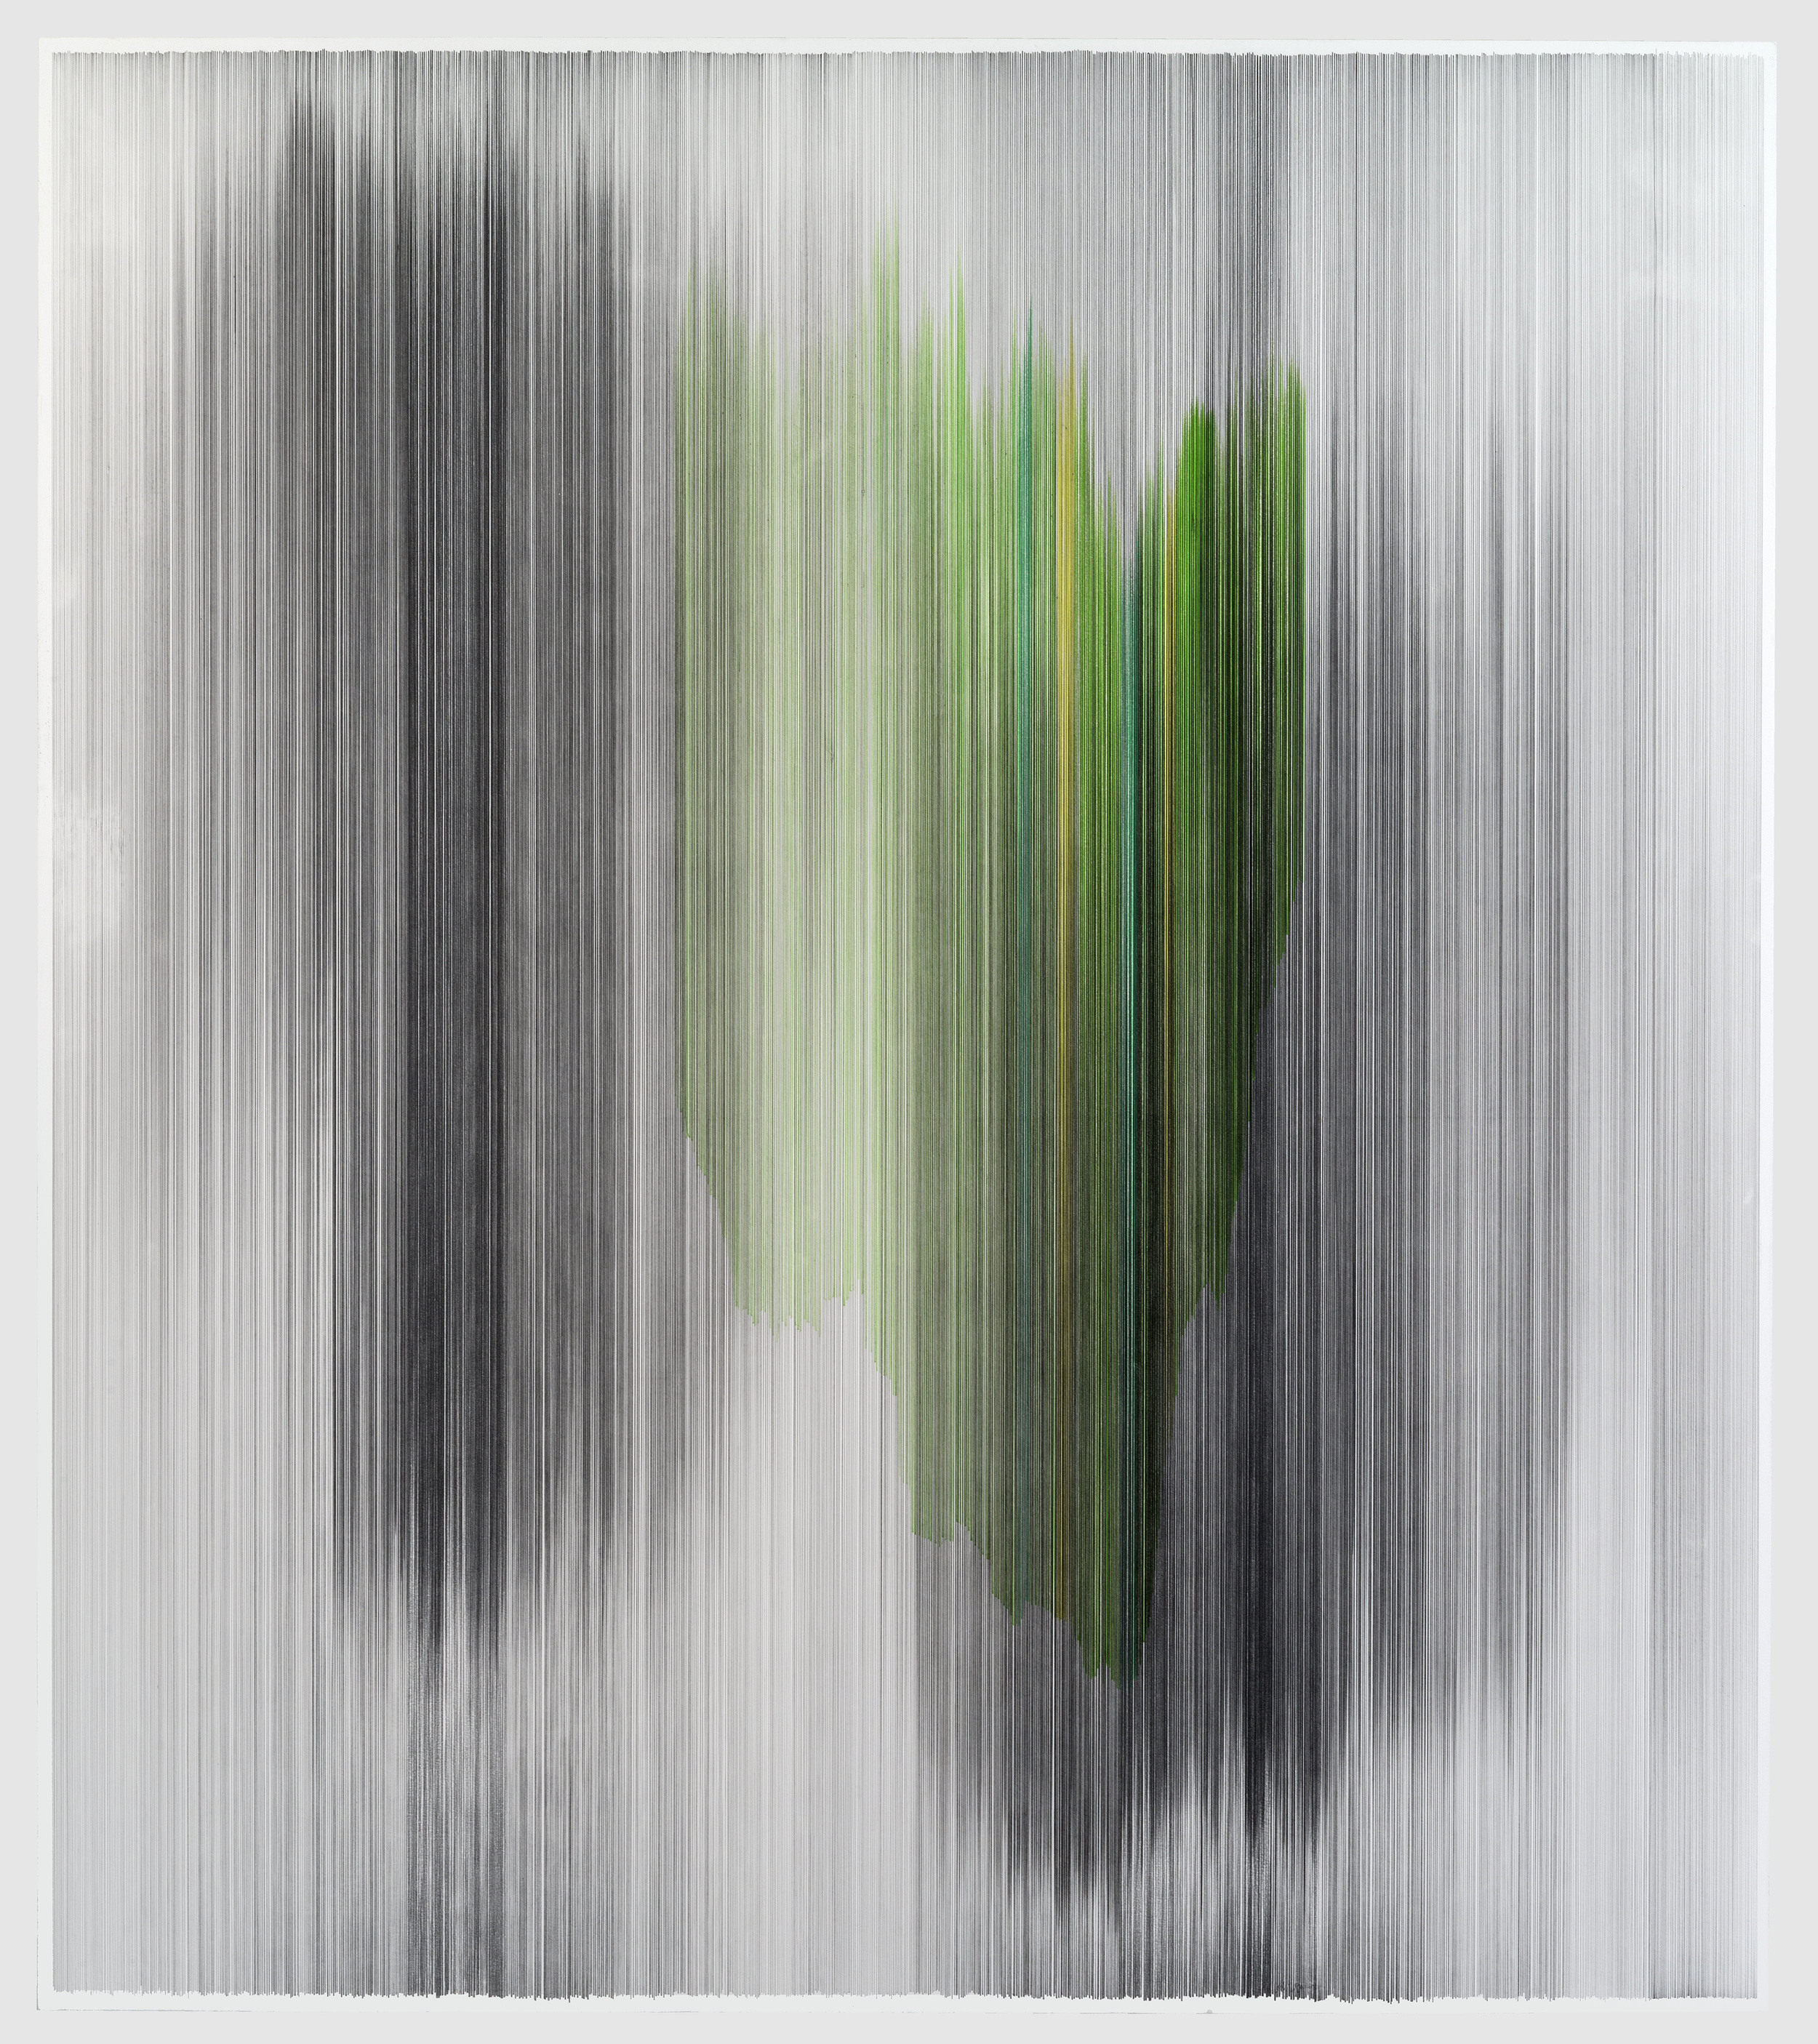    parallel 40   2013 graphite and colored pencil on mat board 58 x 51 inches Private Collection, Chicago, Illinois 